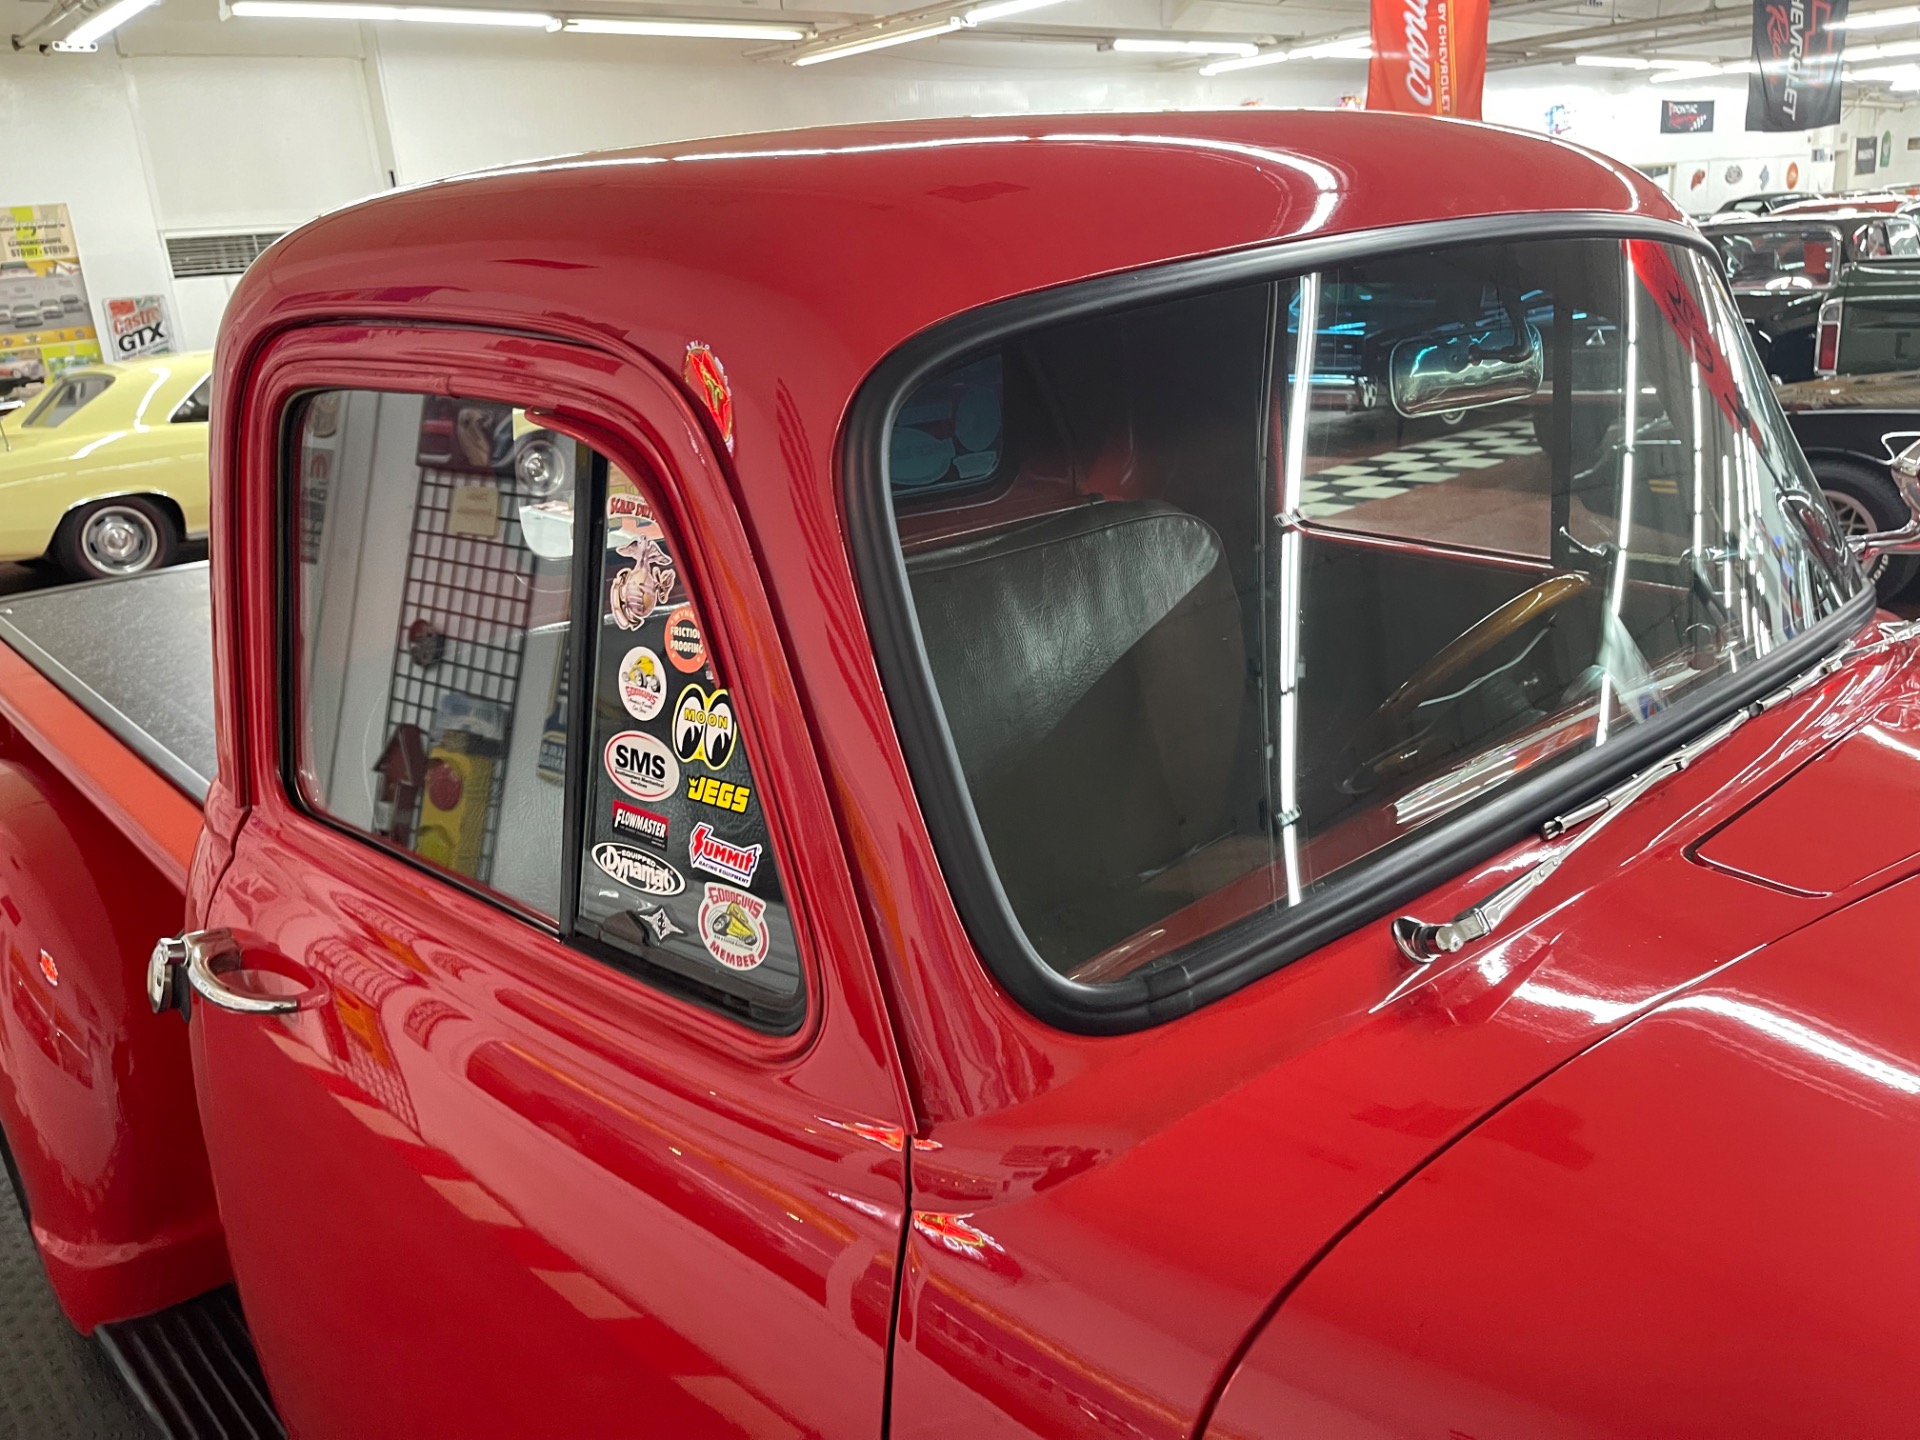 Gallery with pictures and videos of Pick-up conversions